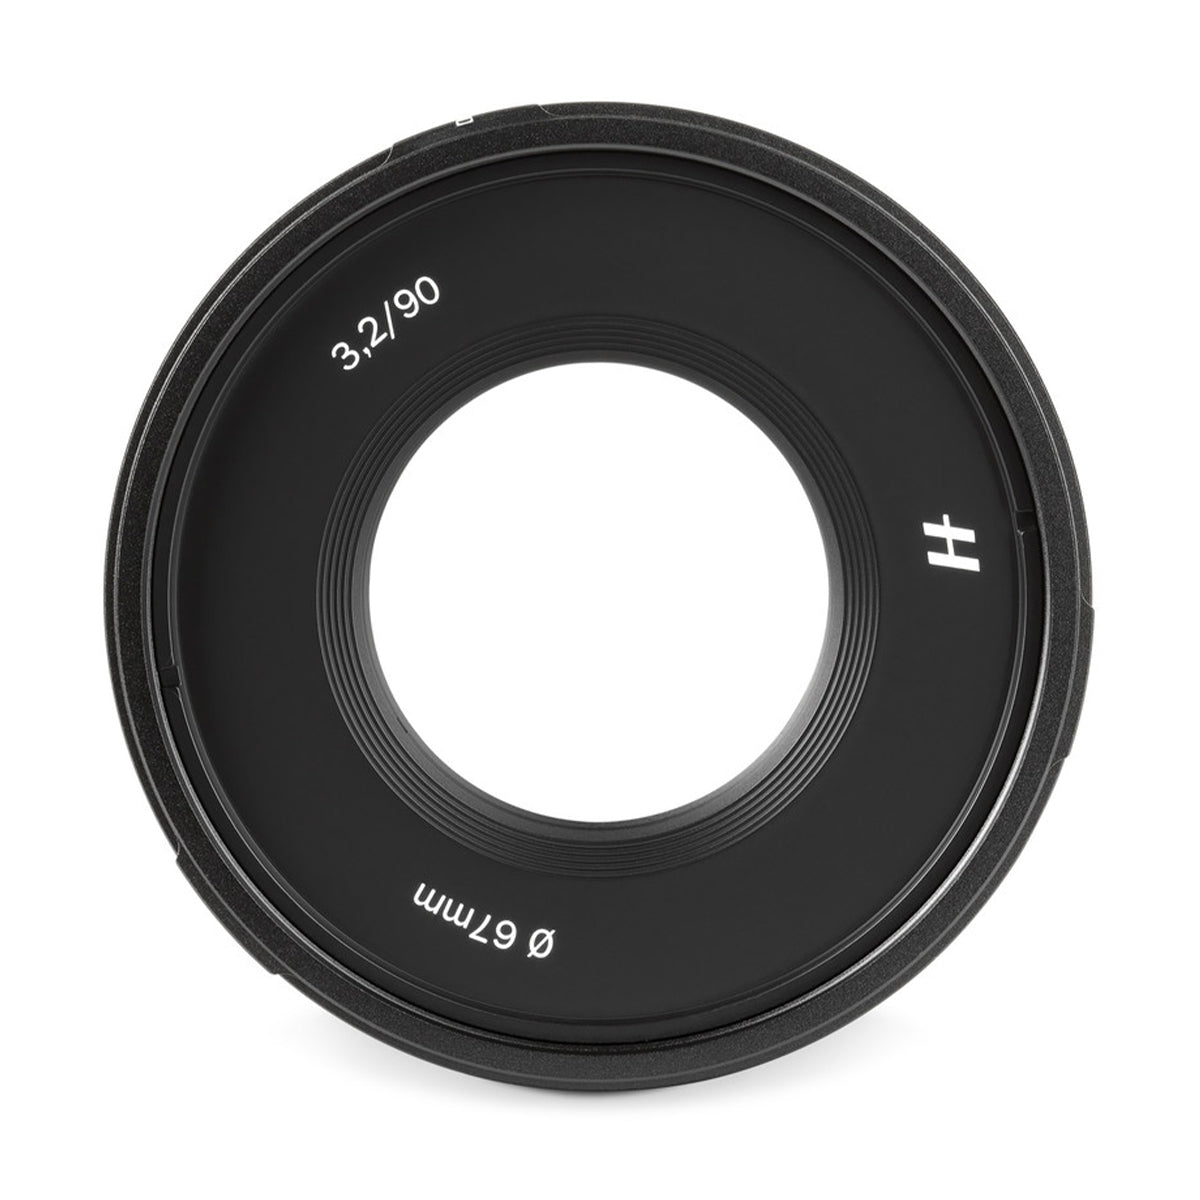 Hasselblad XCD 90mm f3.2 lens